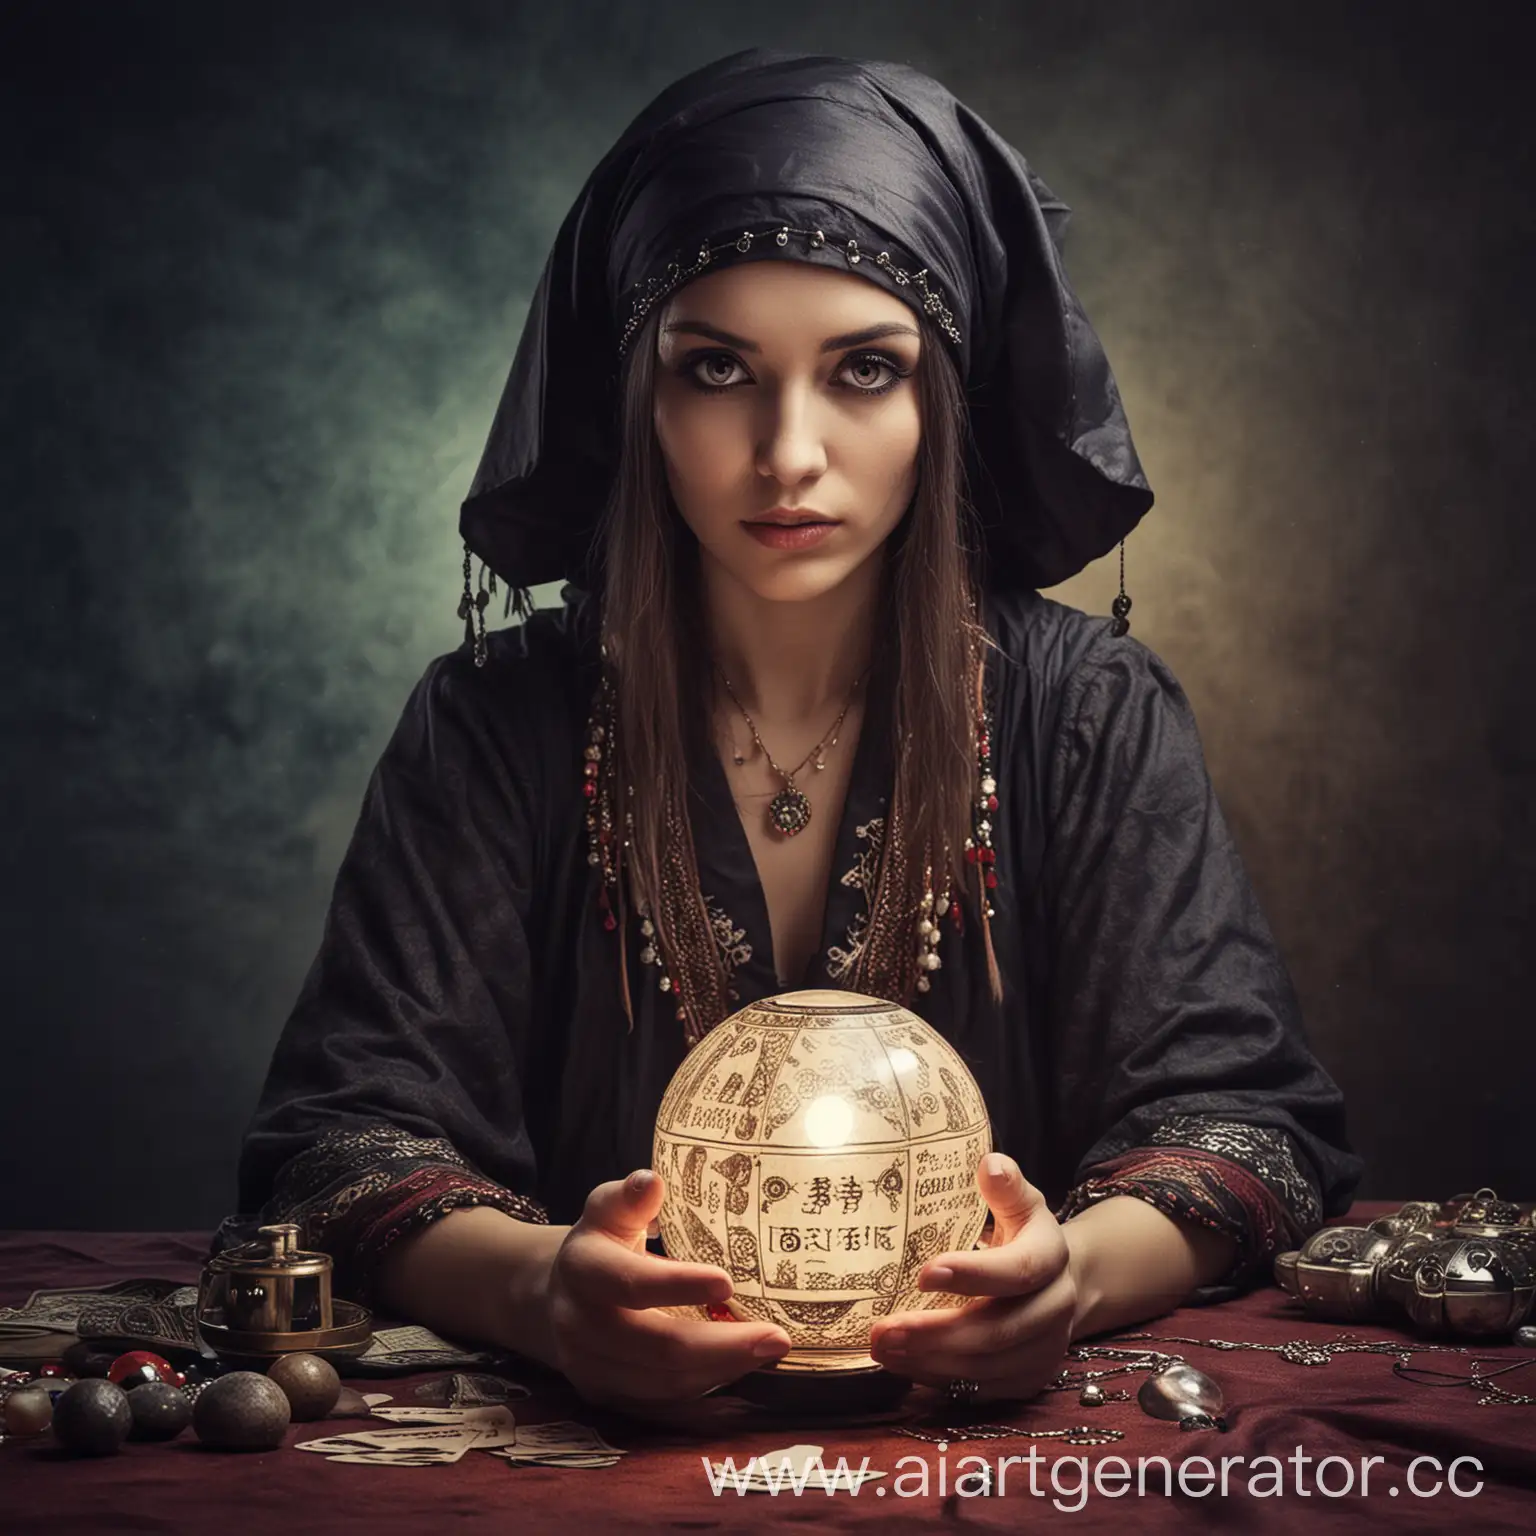 Enigmatic-Fortune-Teller-Revealing-Destinies-in-Shadowy-Ambiance